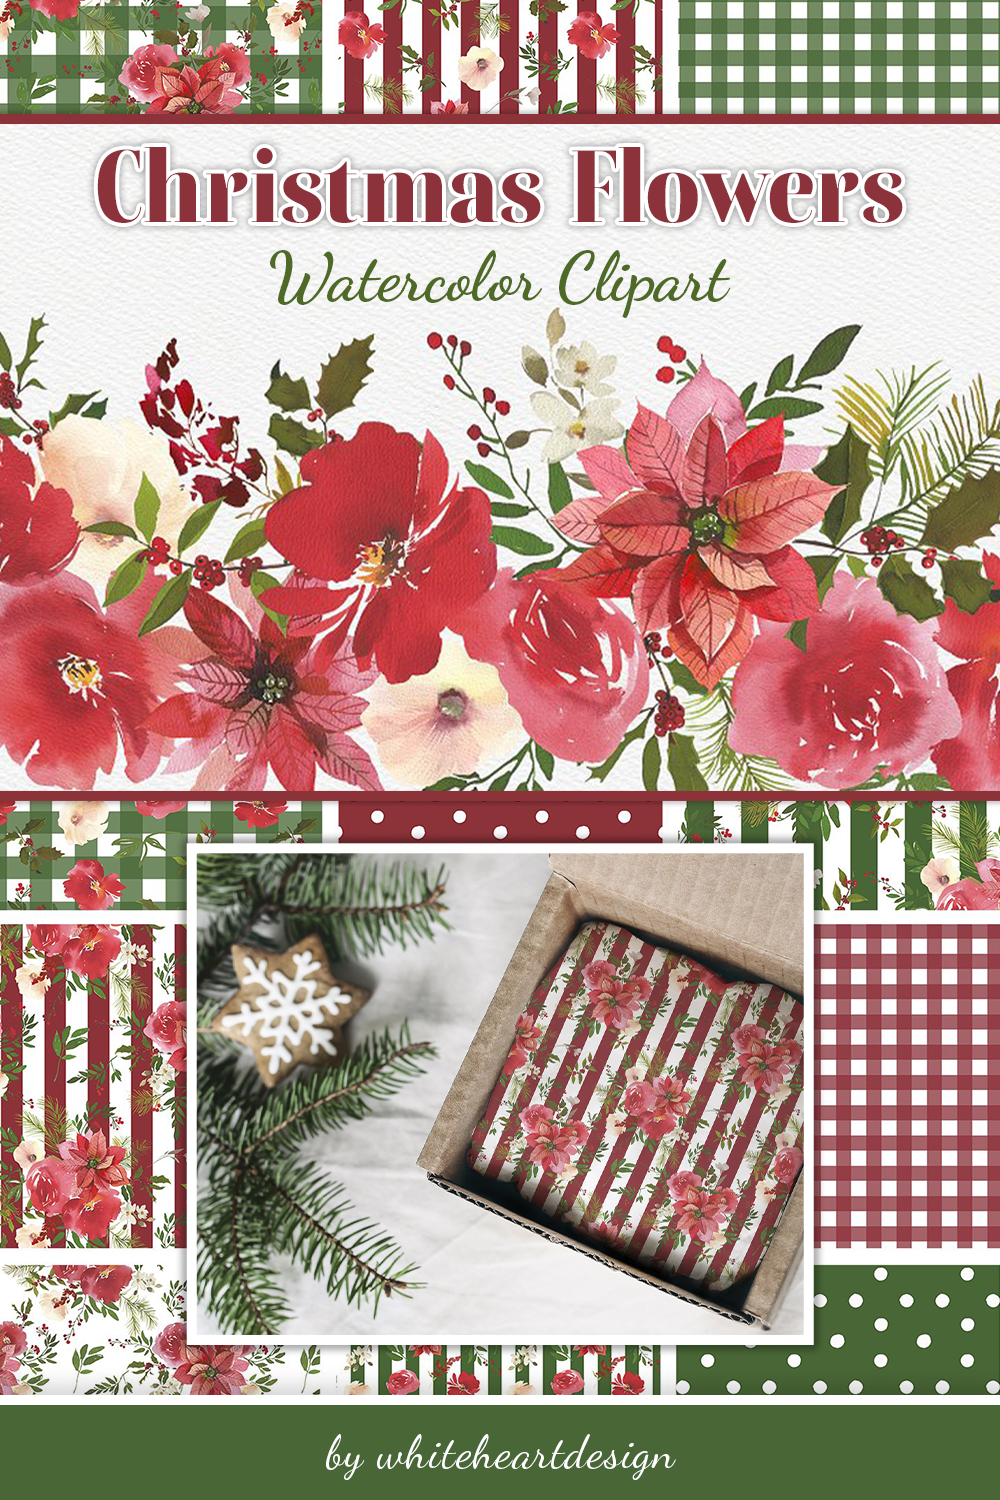 Christmas flowers watercolor clipart of pinterest.